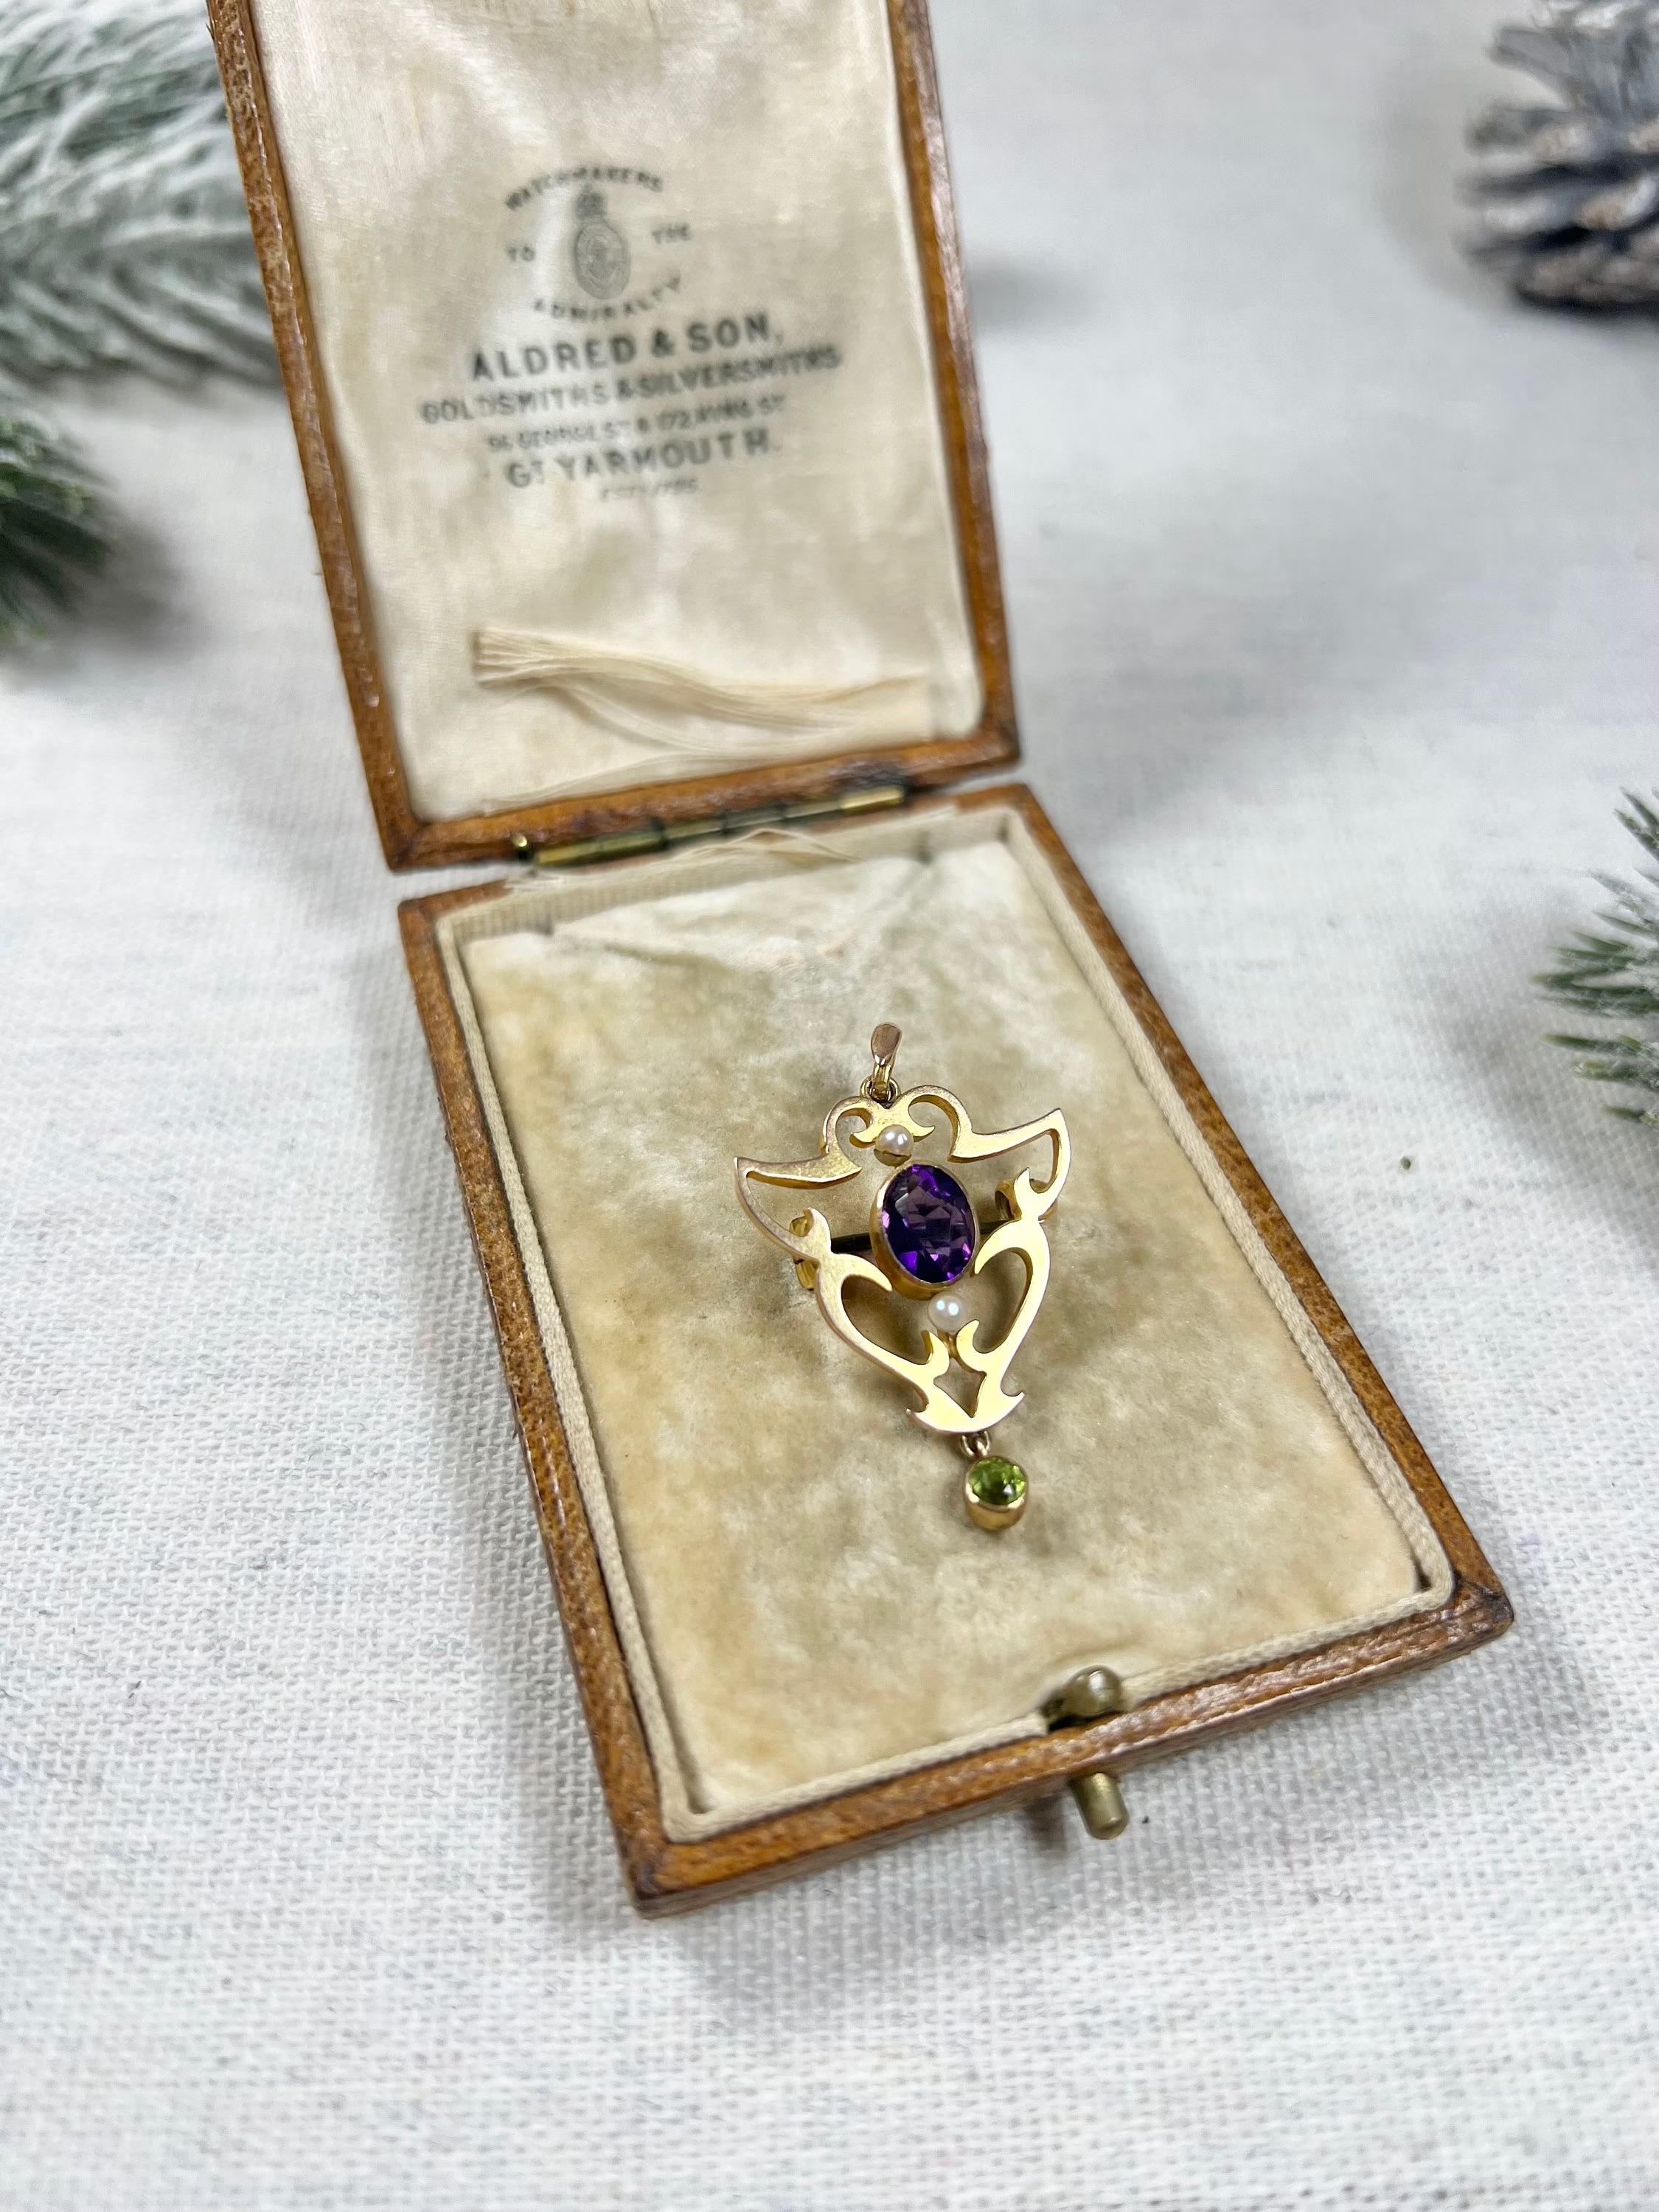 Antique 9ct Gold, Edwardian Amethyst, Pearl & Peridot Suffragette Pendant/Brooch For Sale 4